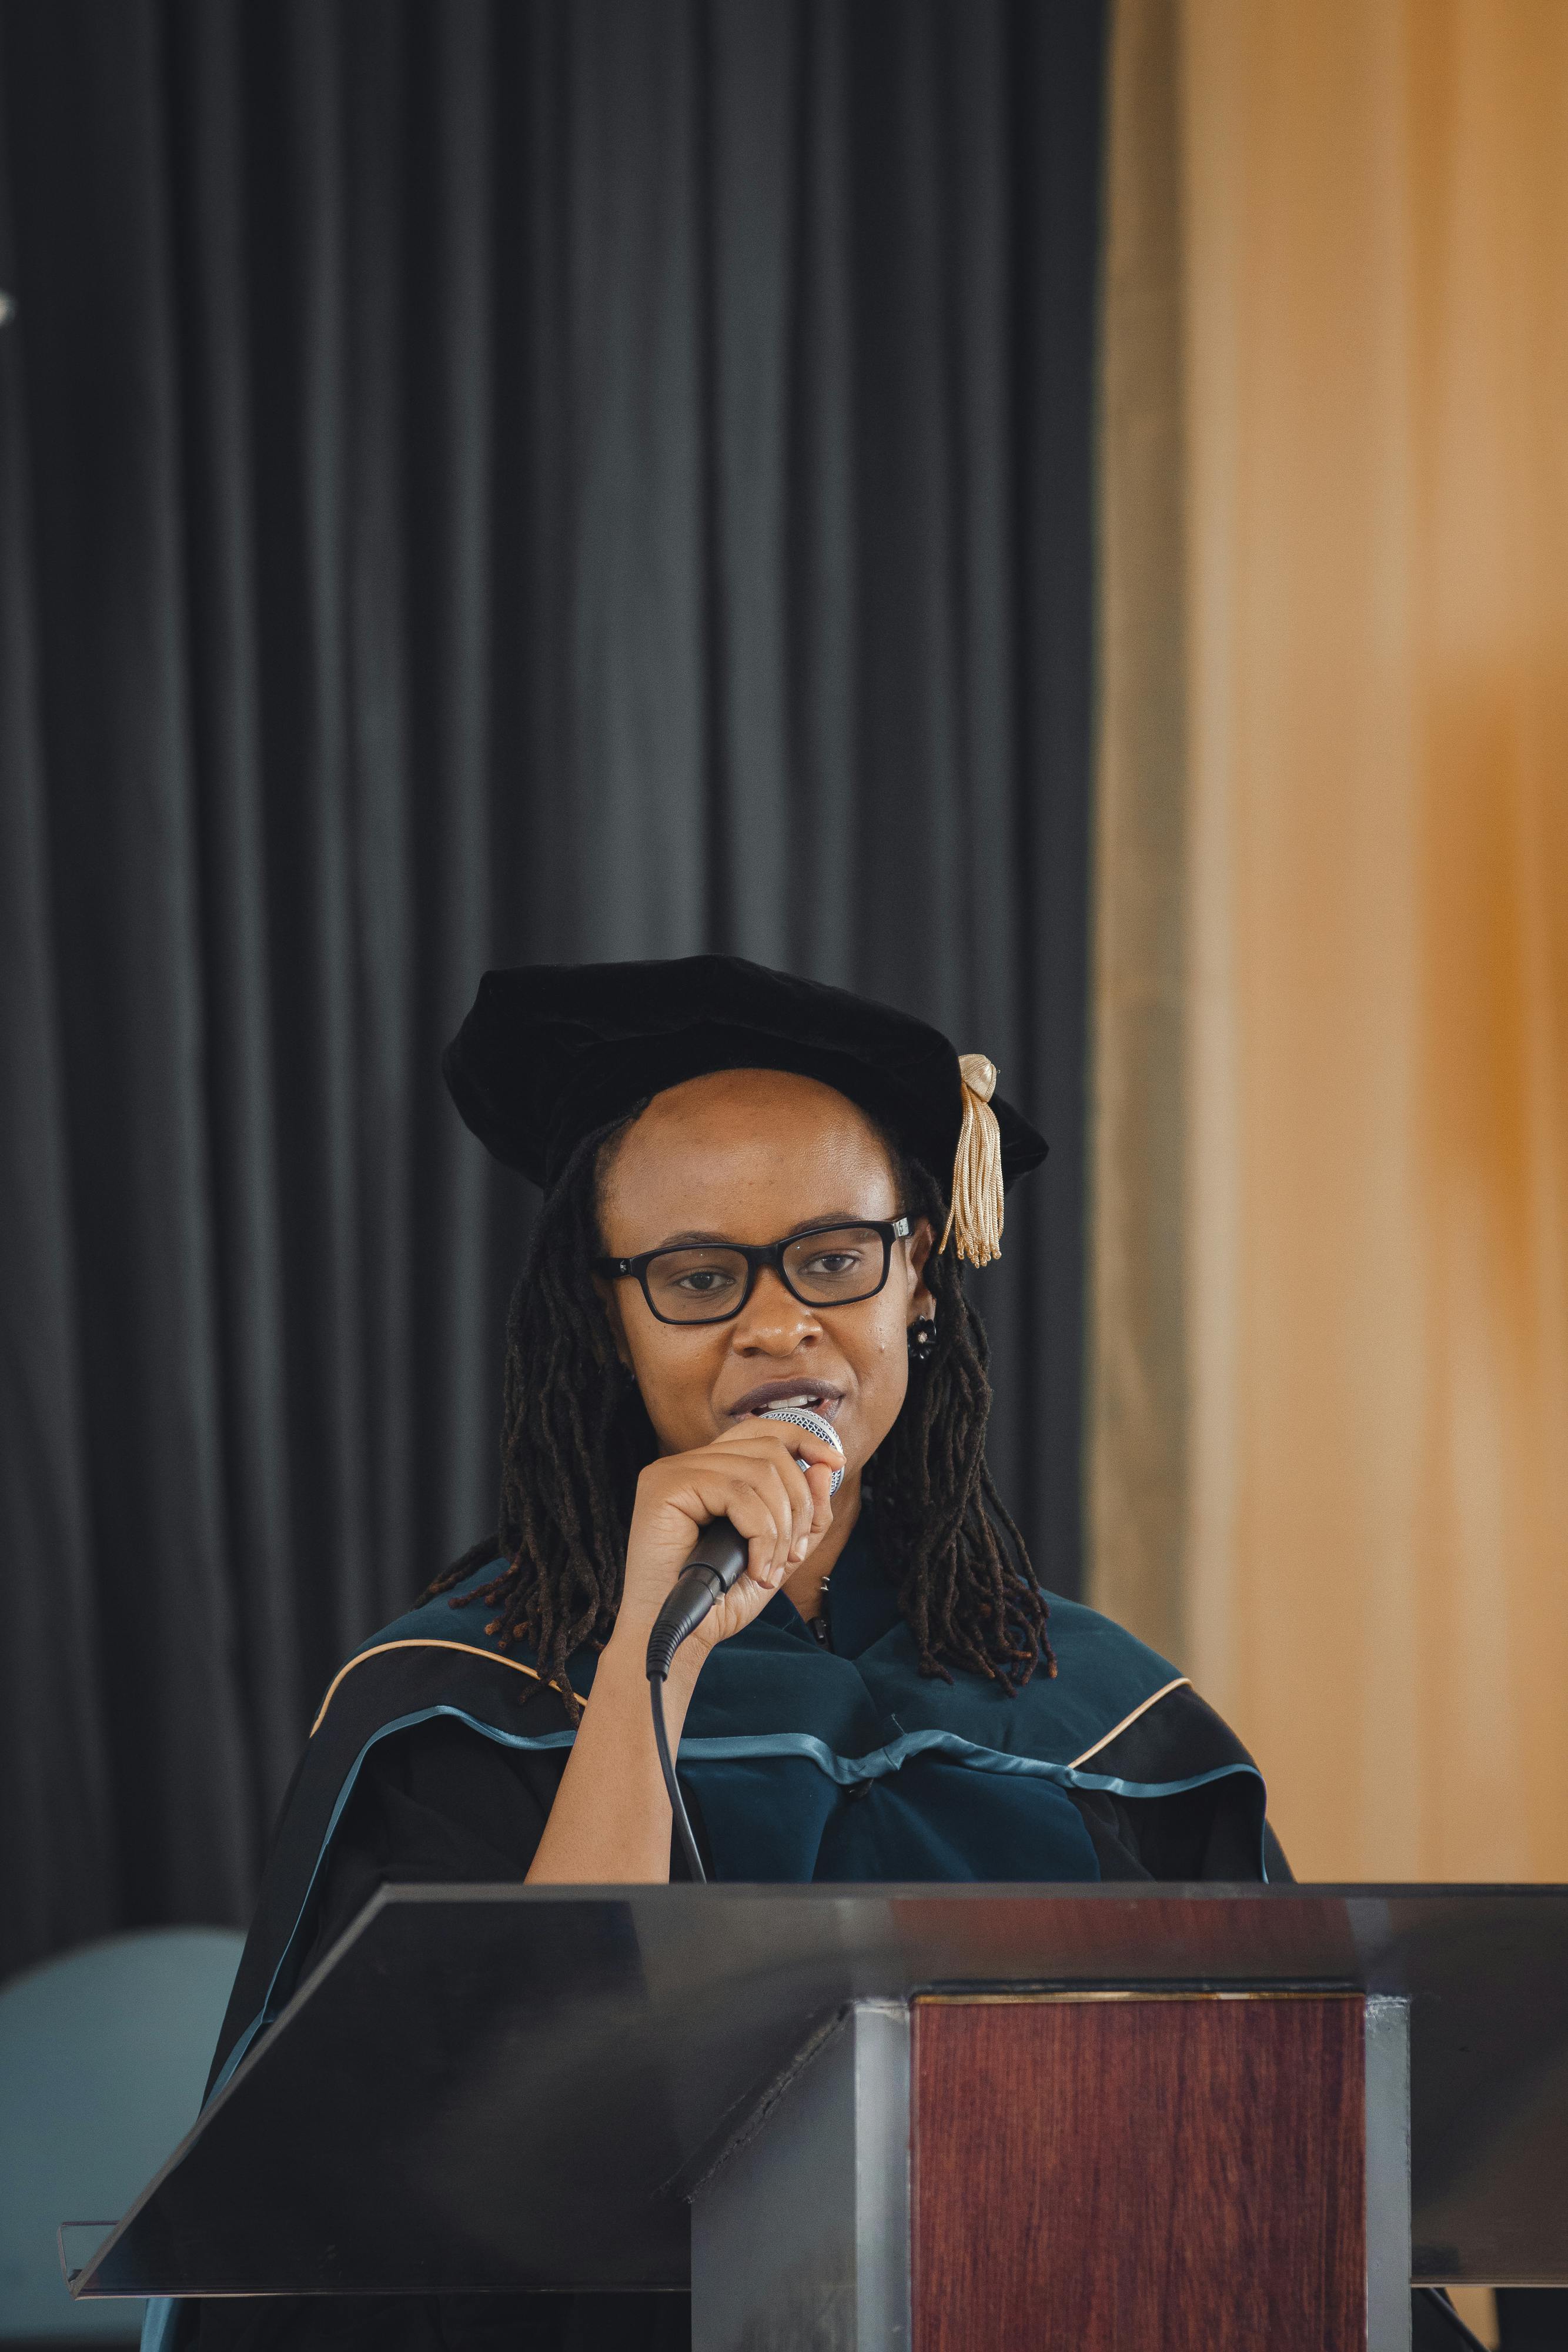 A college graduate speaking on a microphone on stage | Source: Pexels